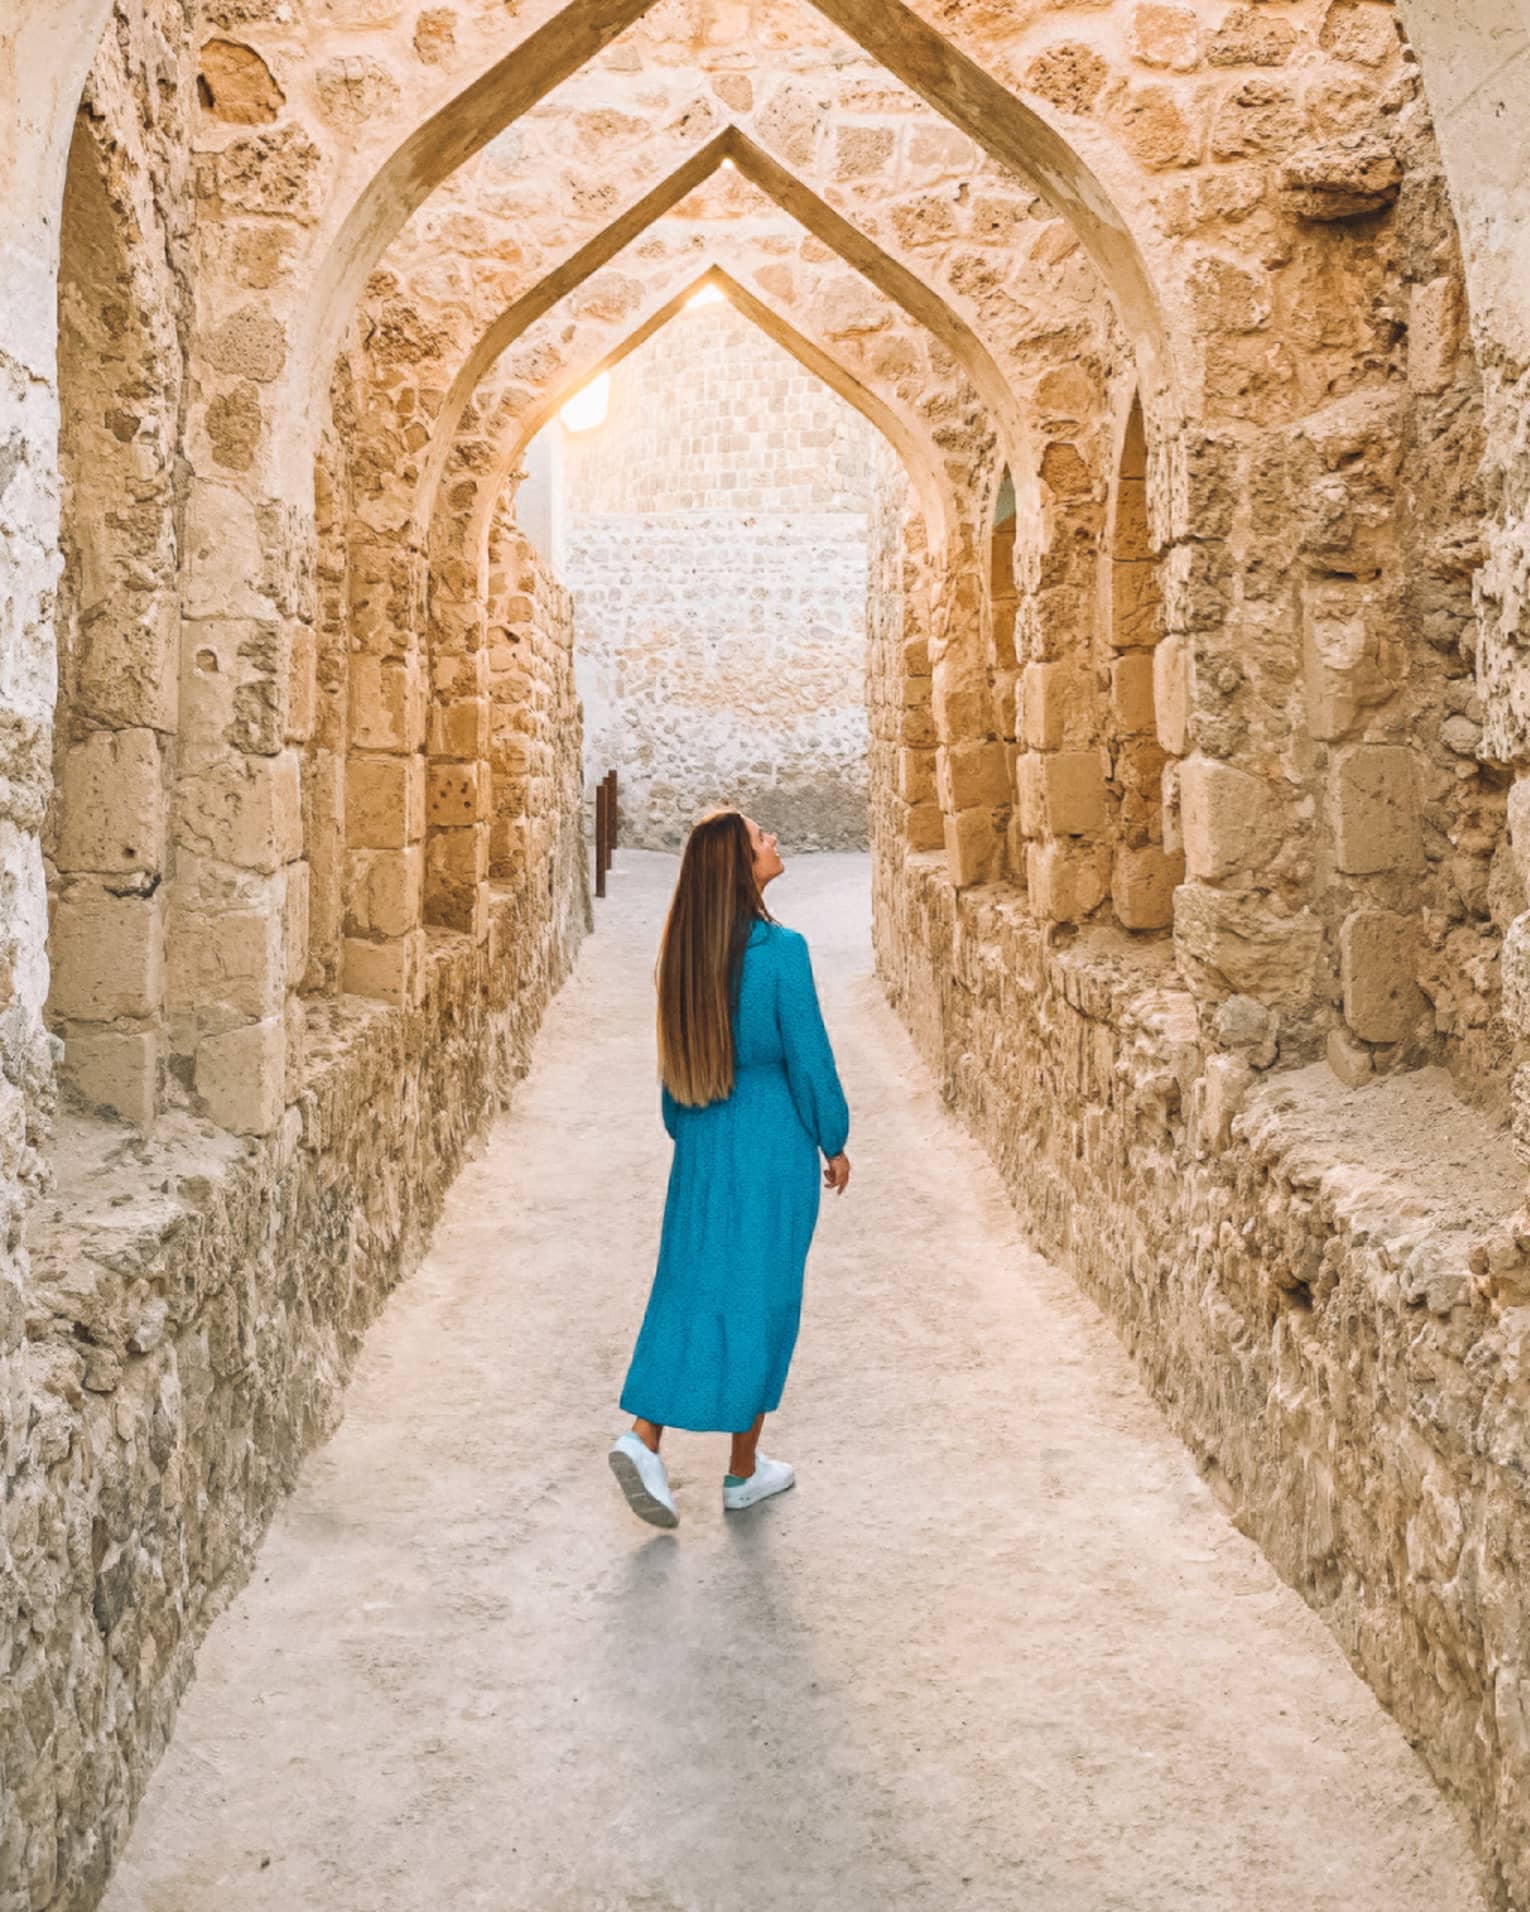 A woman stands underneath a stone pathway.